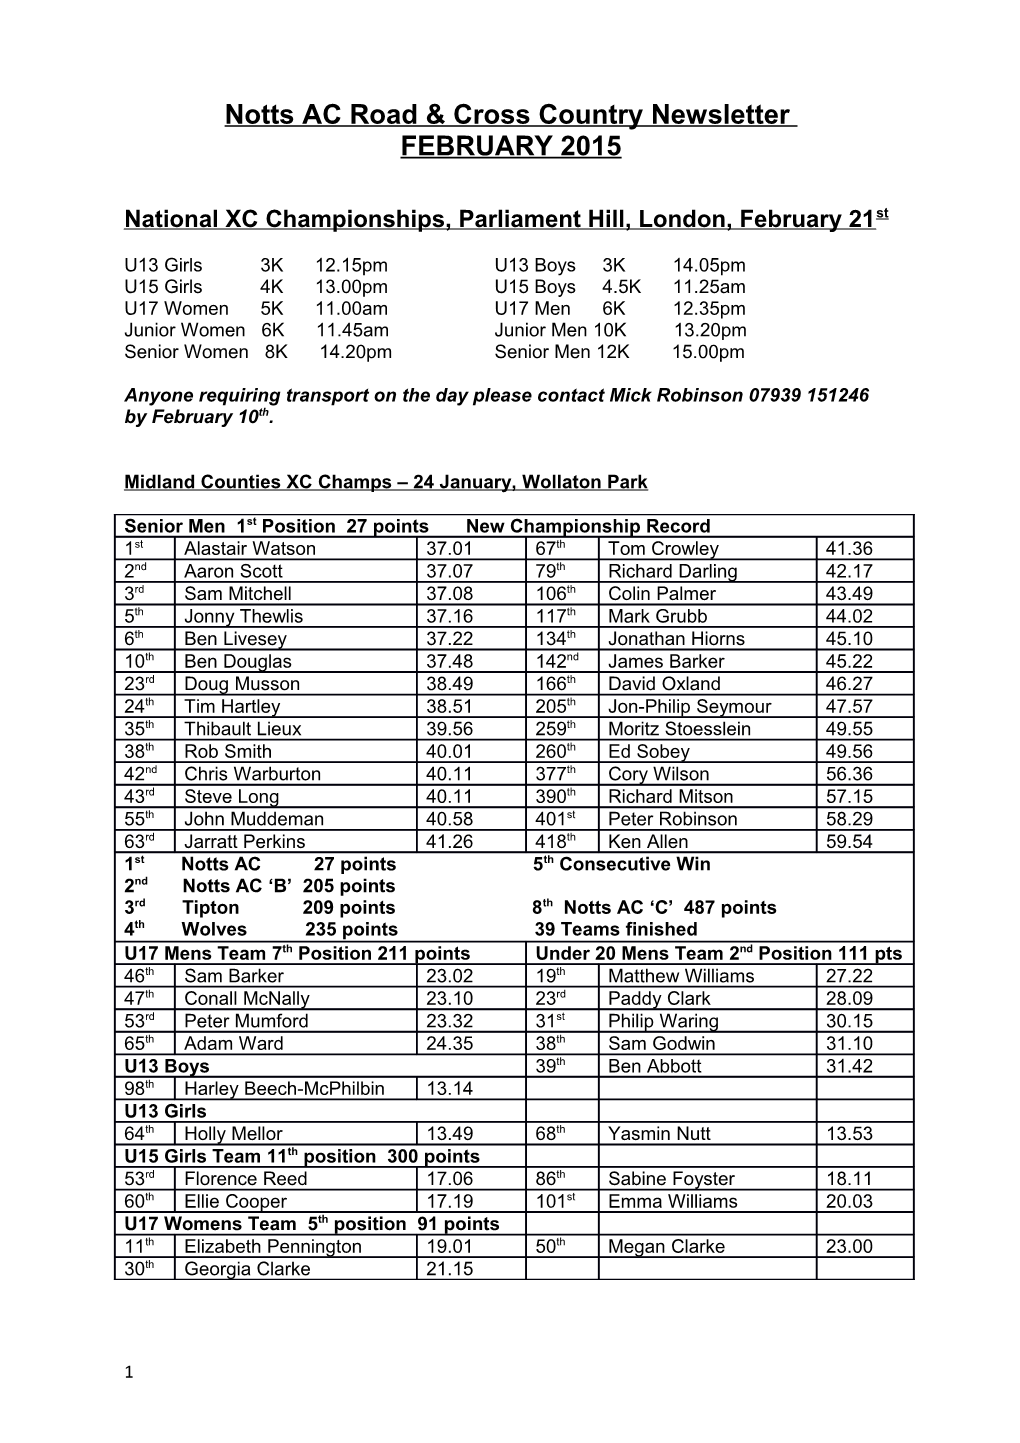 Notts Acroad & Cross Country Newsletter